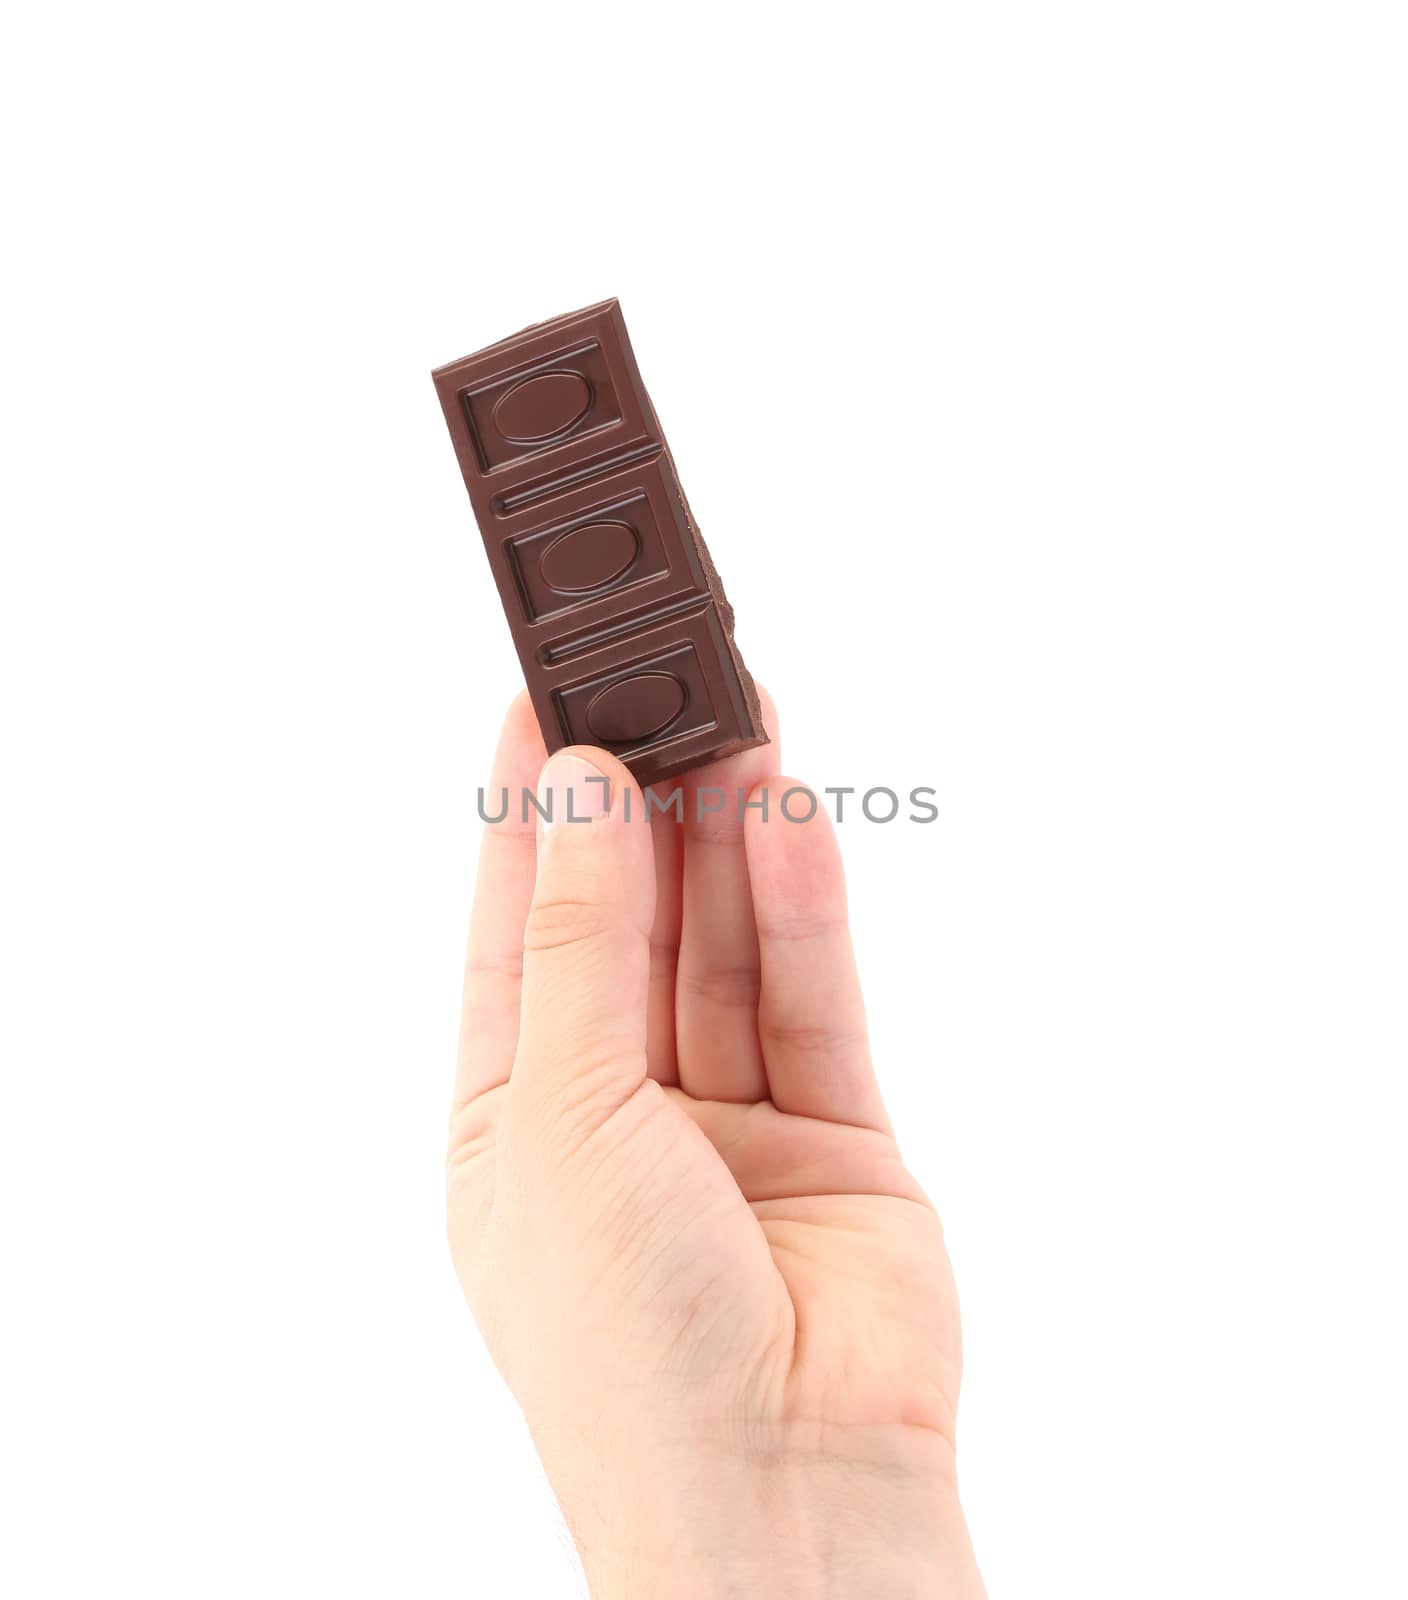 Chocolate bar in hand. Isolated on a white background.